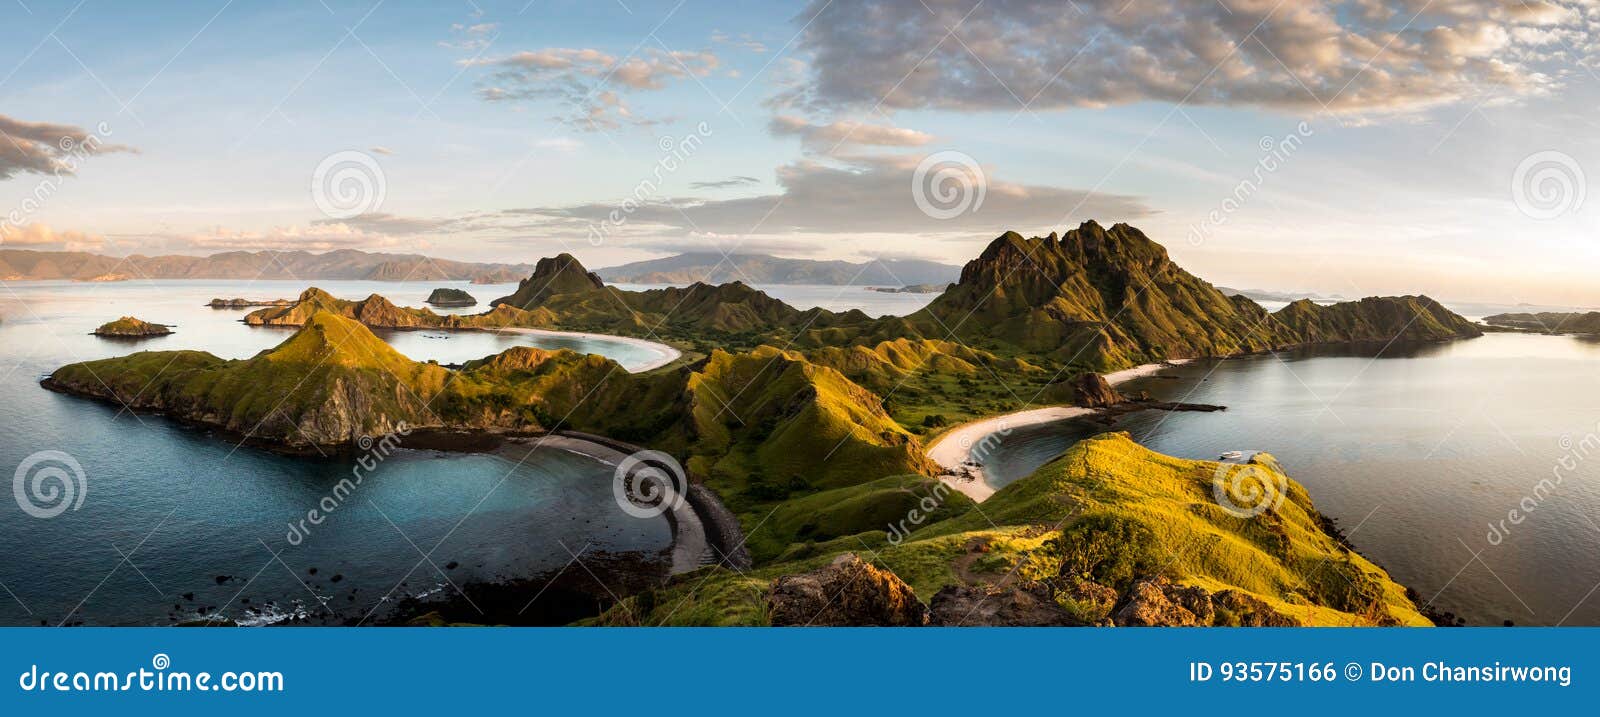 landscape view from the top of padar island in komodo islands, f